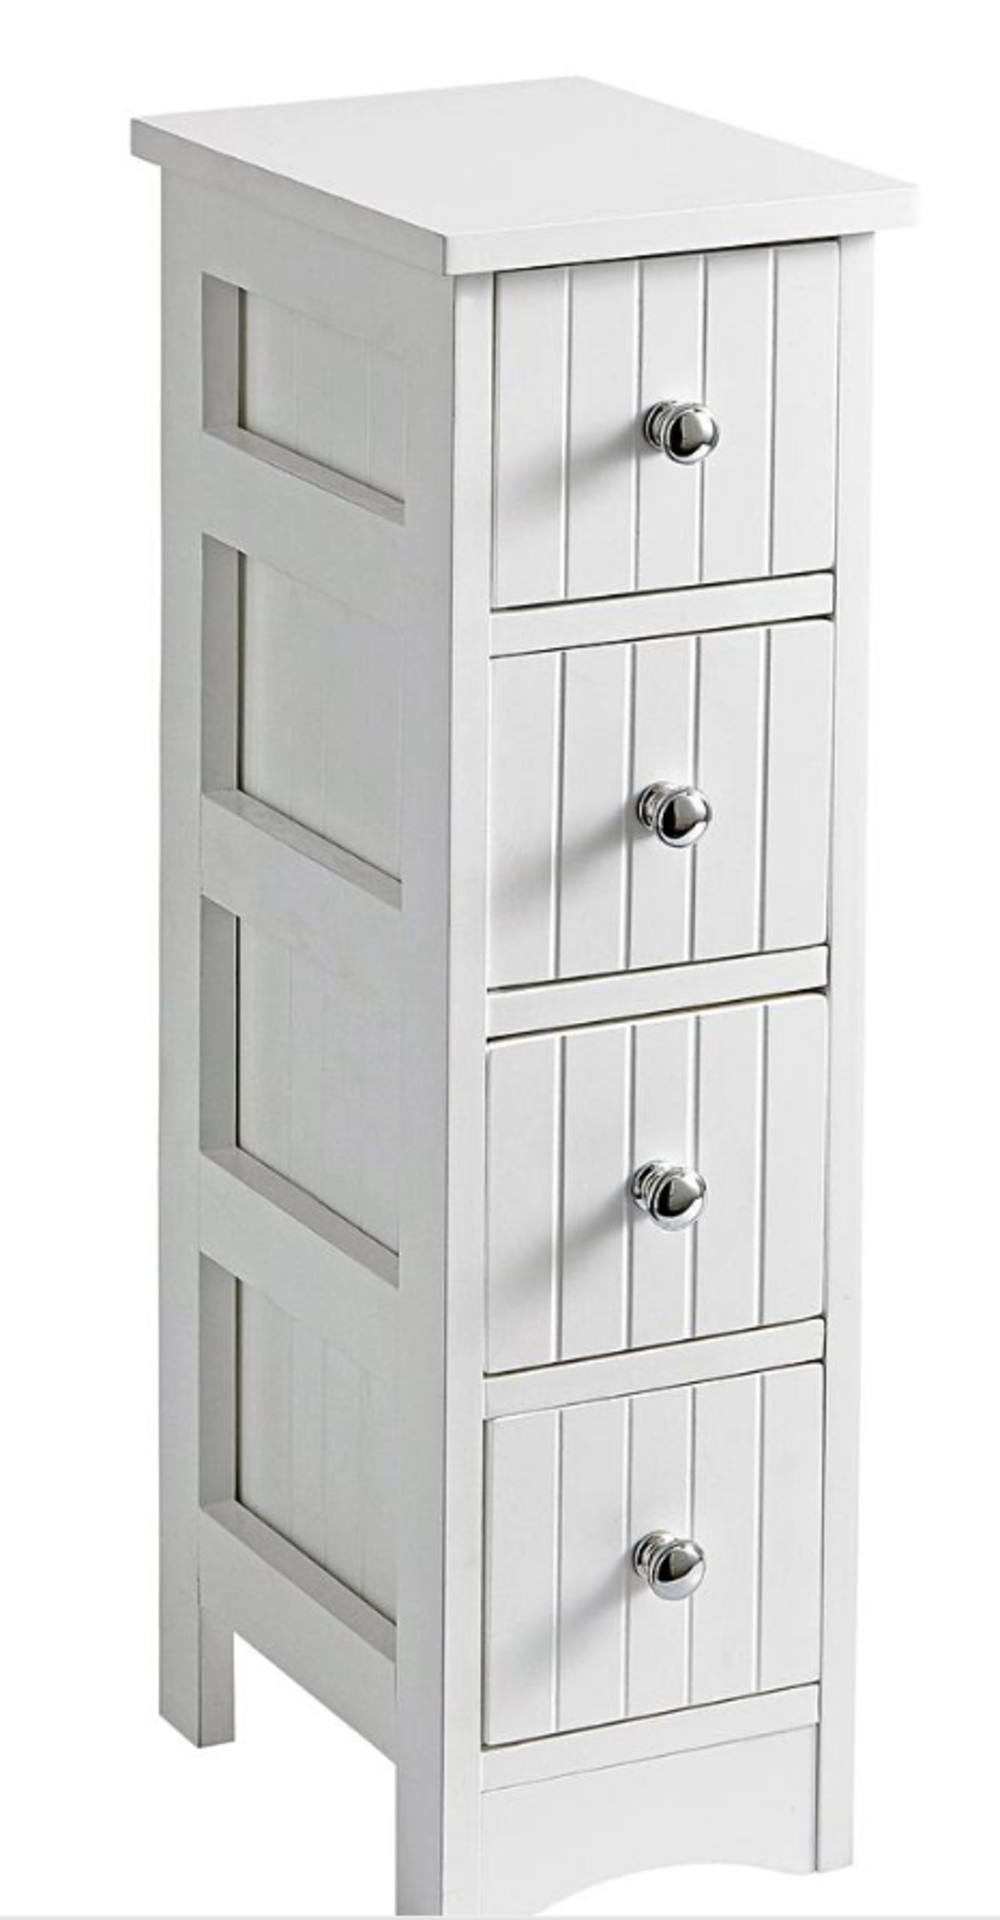 New England 4-Drawer Unit. - SR46. RRP £139.00. This cleverly designed slimline 4-drawer unit is